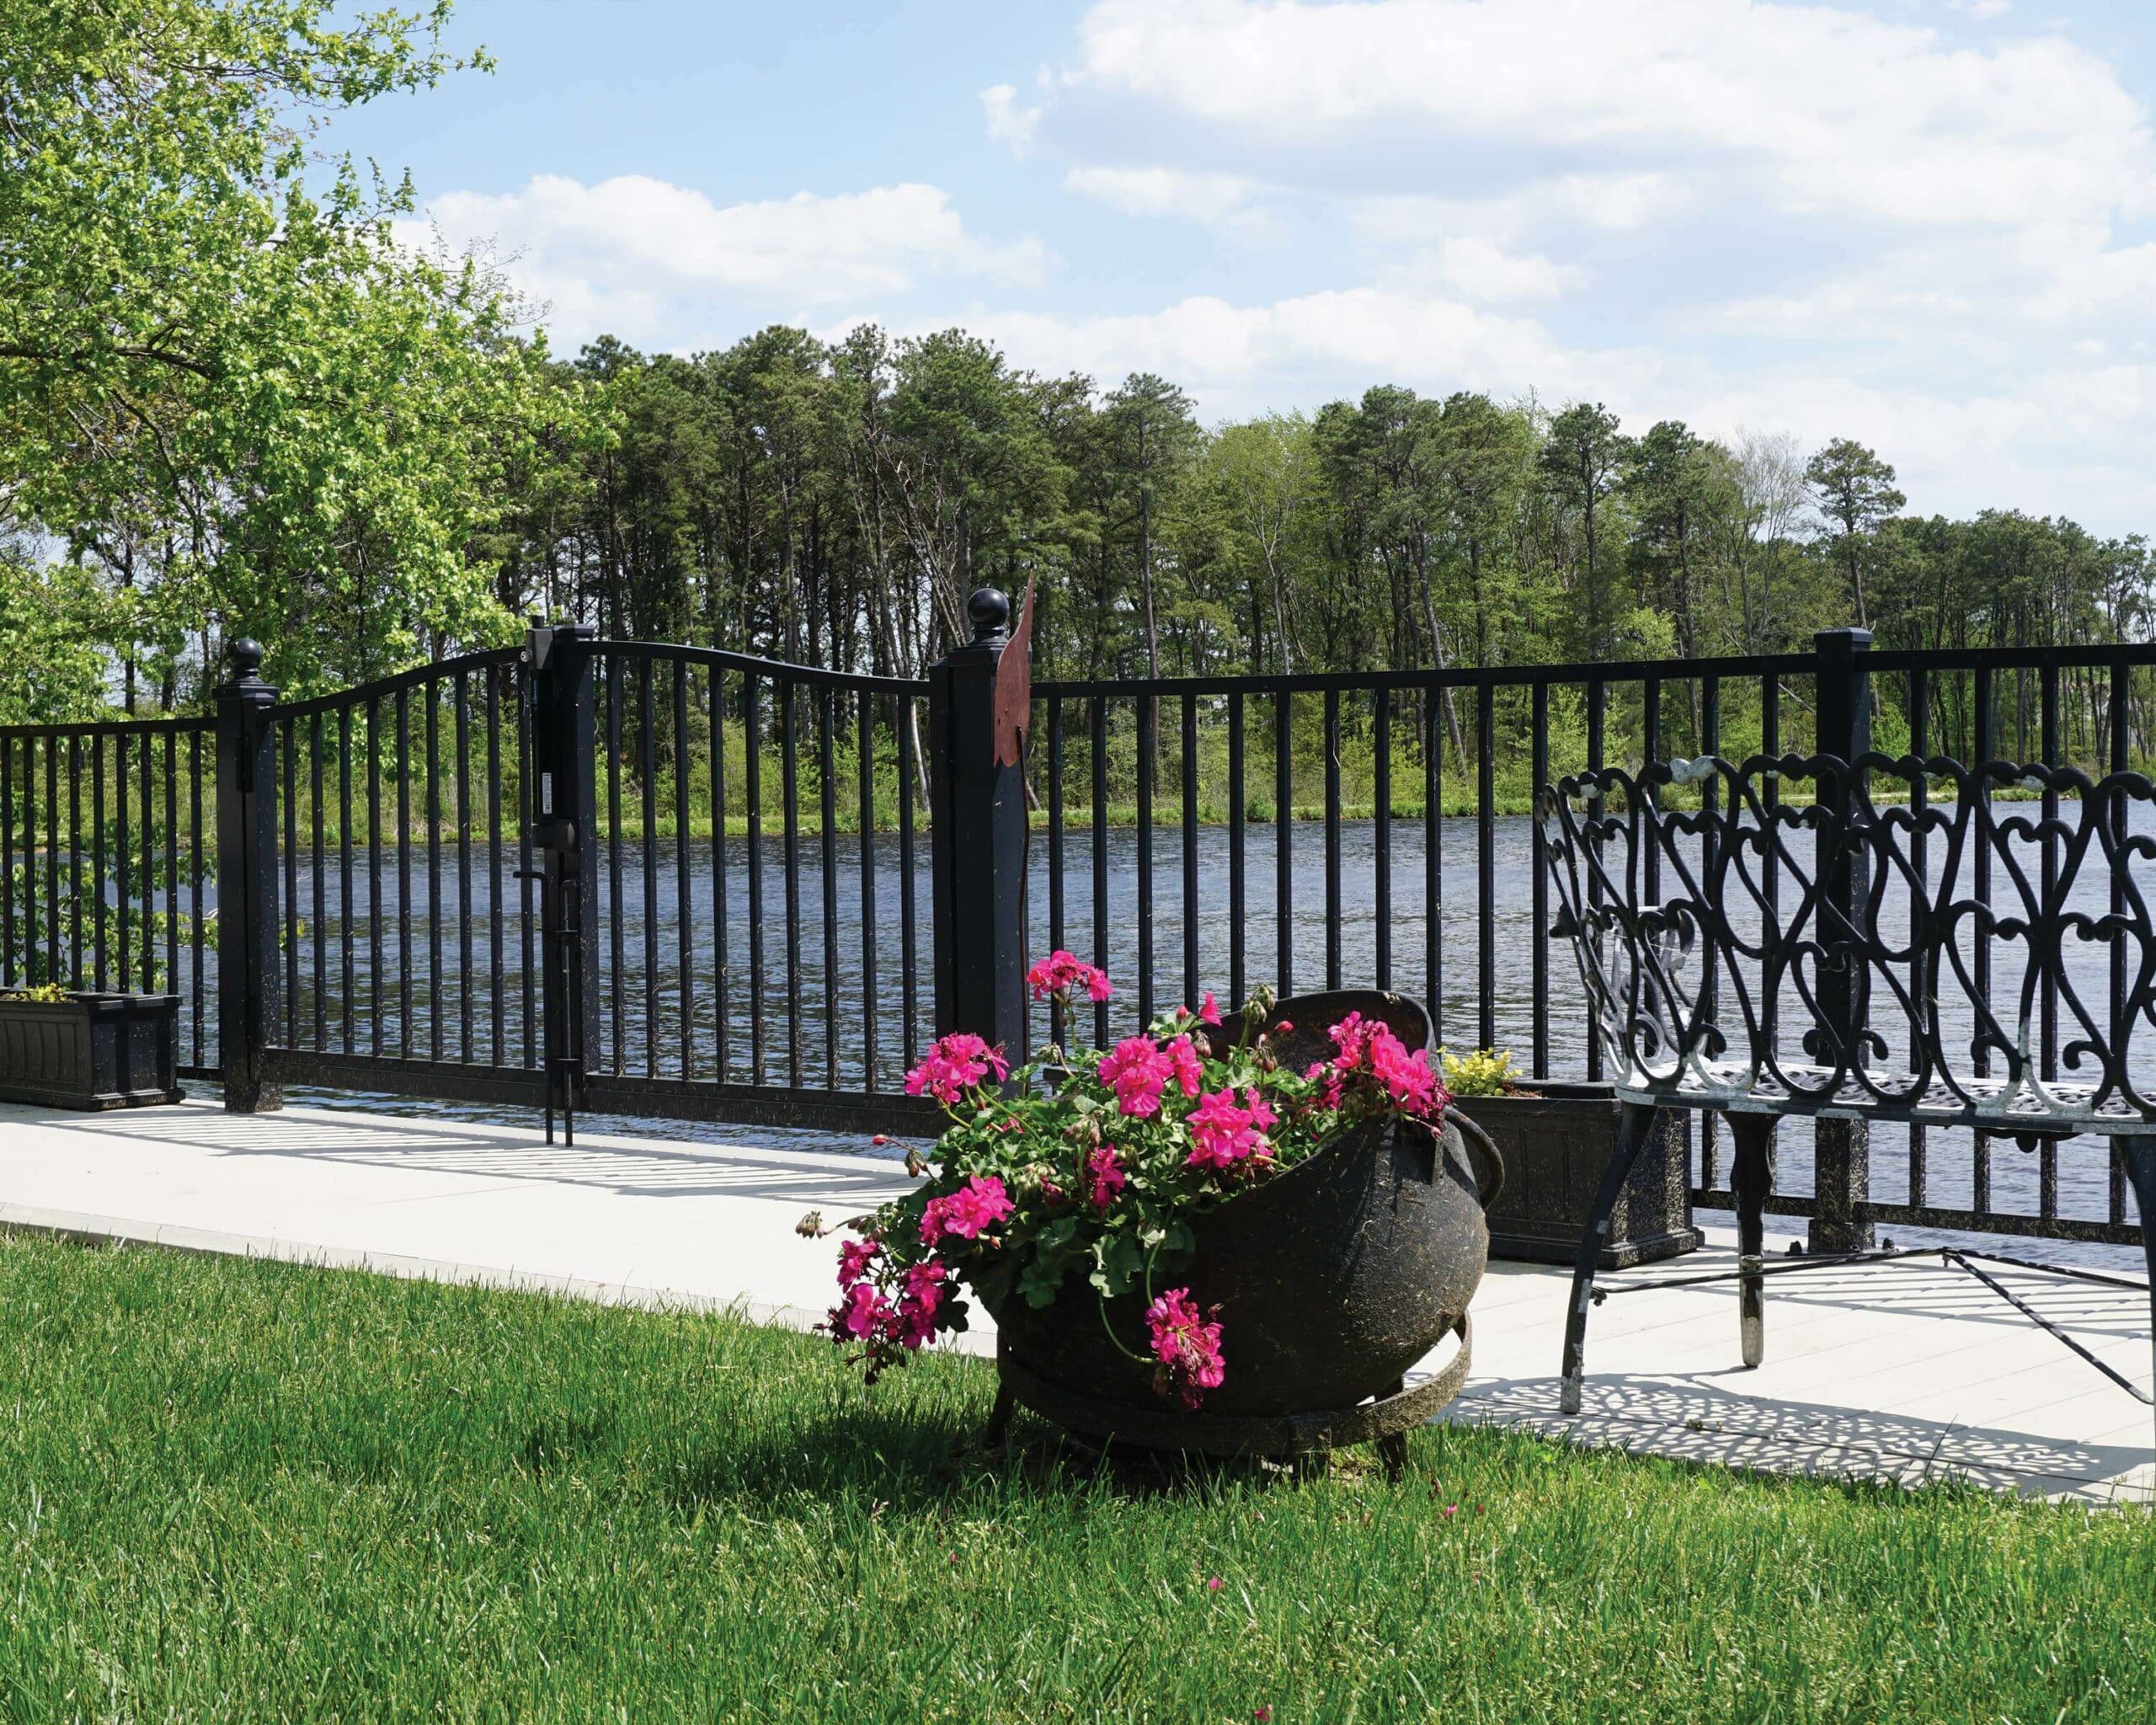 A large outdoor flower pot with striking pink flowers sits in front of an Active Yards Bedrock aluminum fence with Arched Gate between the viewer and the lake.